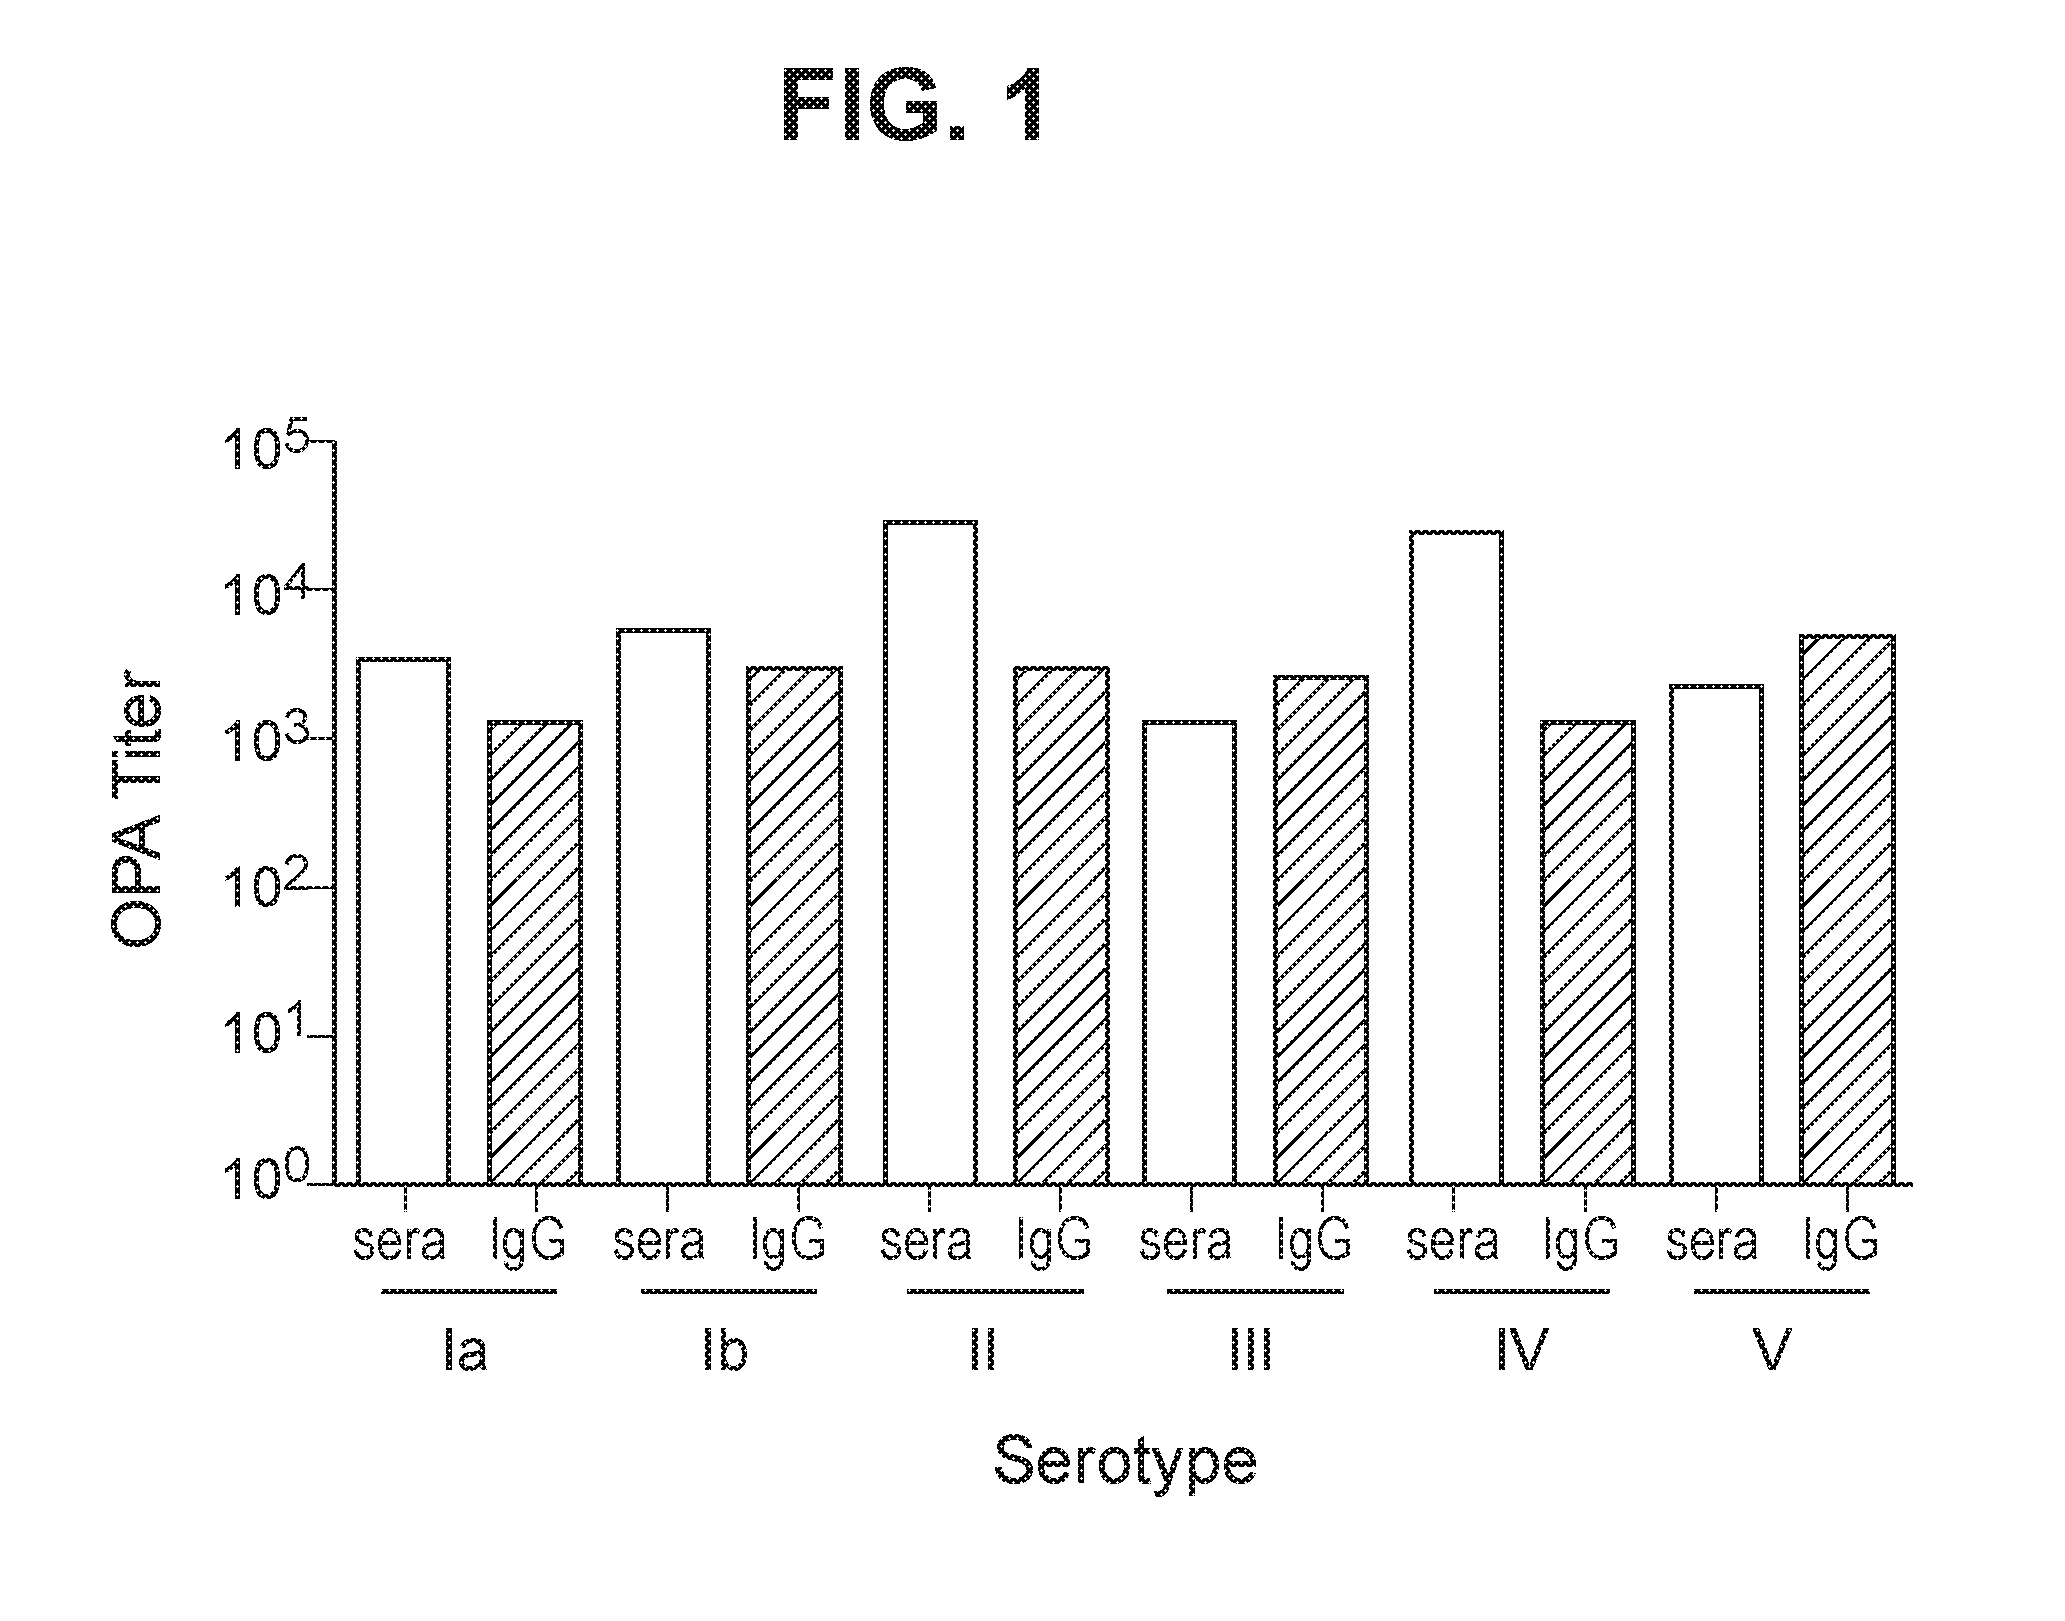 Group b streptococcus polysaccharide-protein conjugates, methods for producing conjugates, immunogenic compositions comprising conjugates, and uses thereof